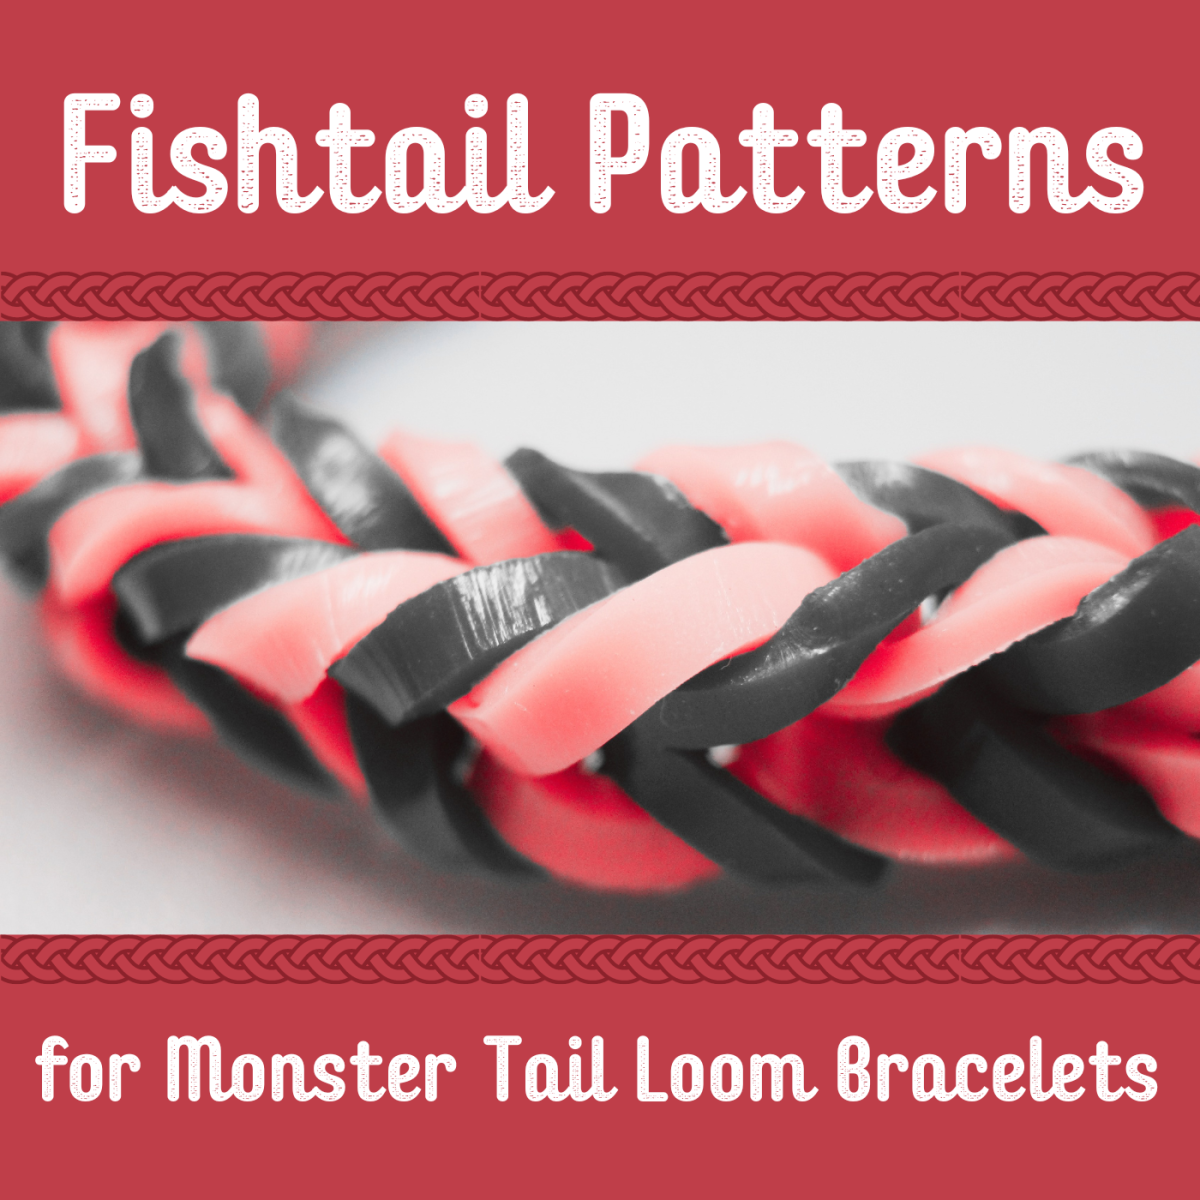 Fishtail Patterns for the Monster Tail Loom